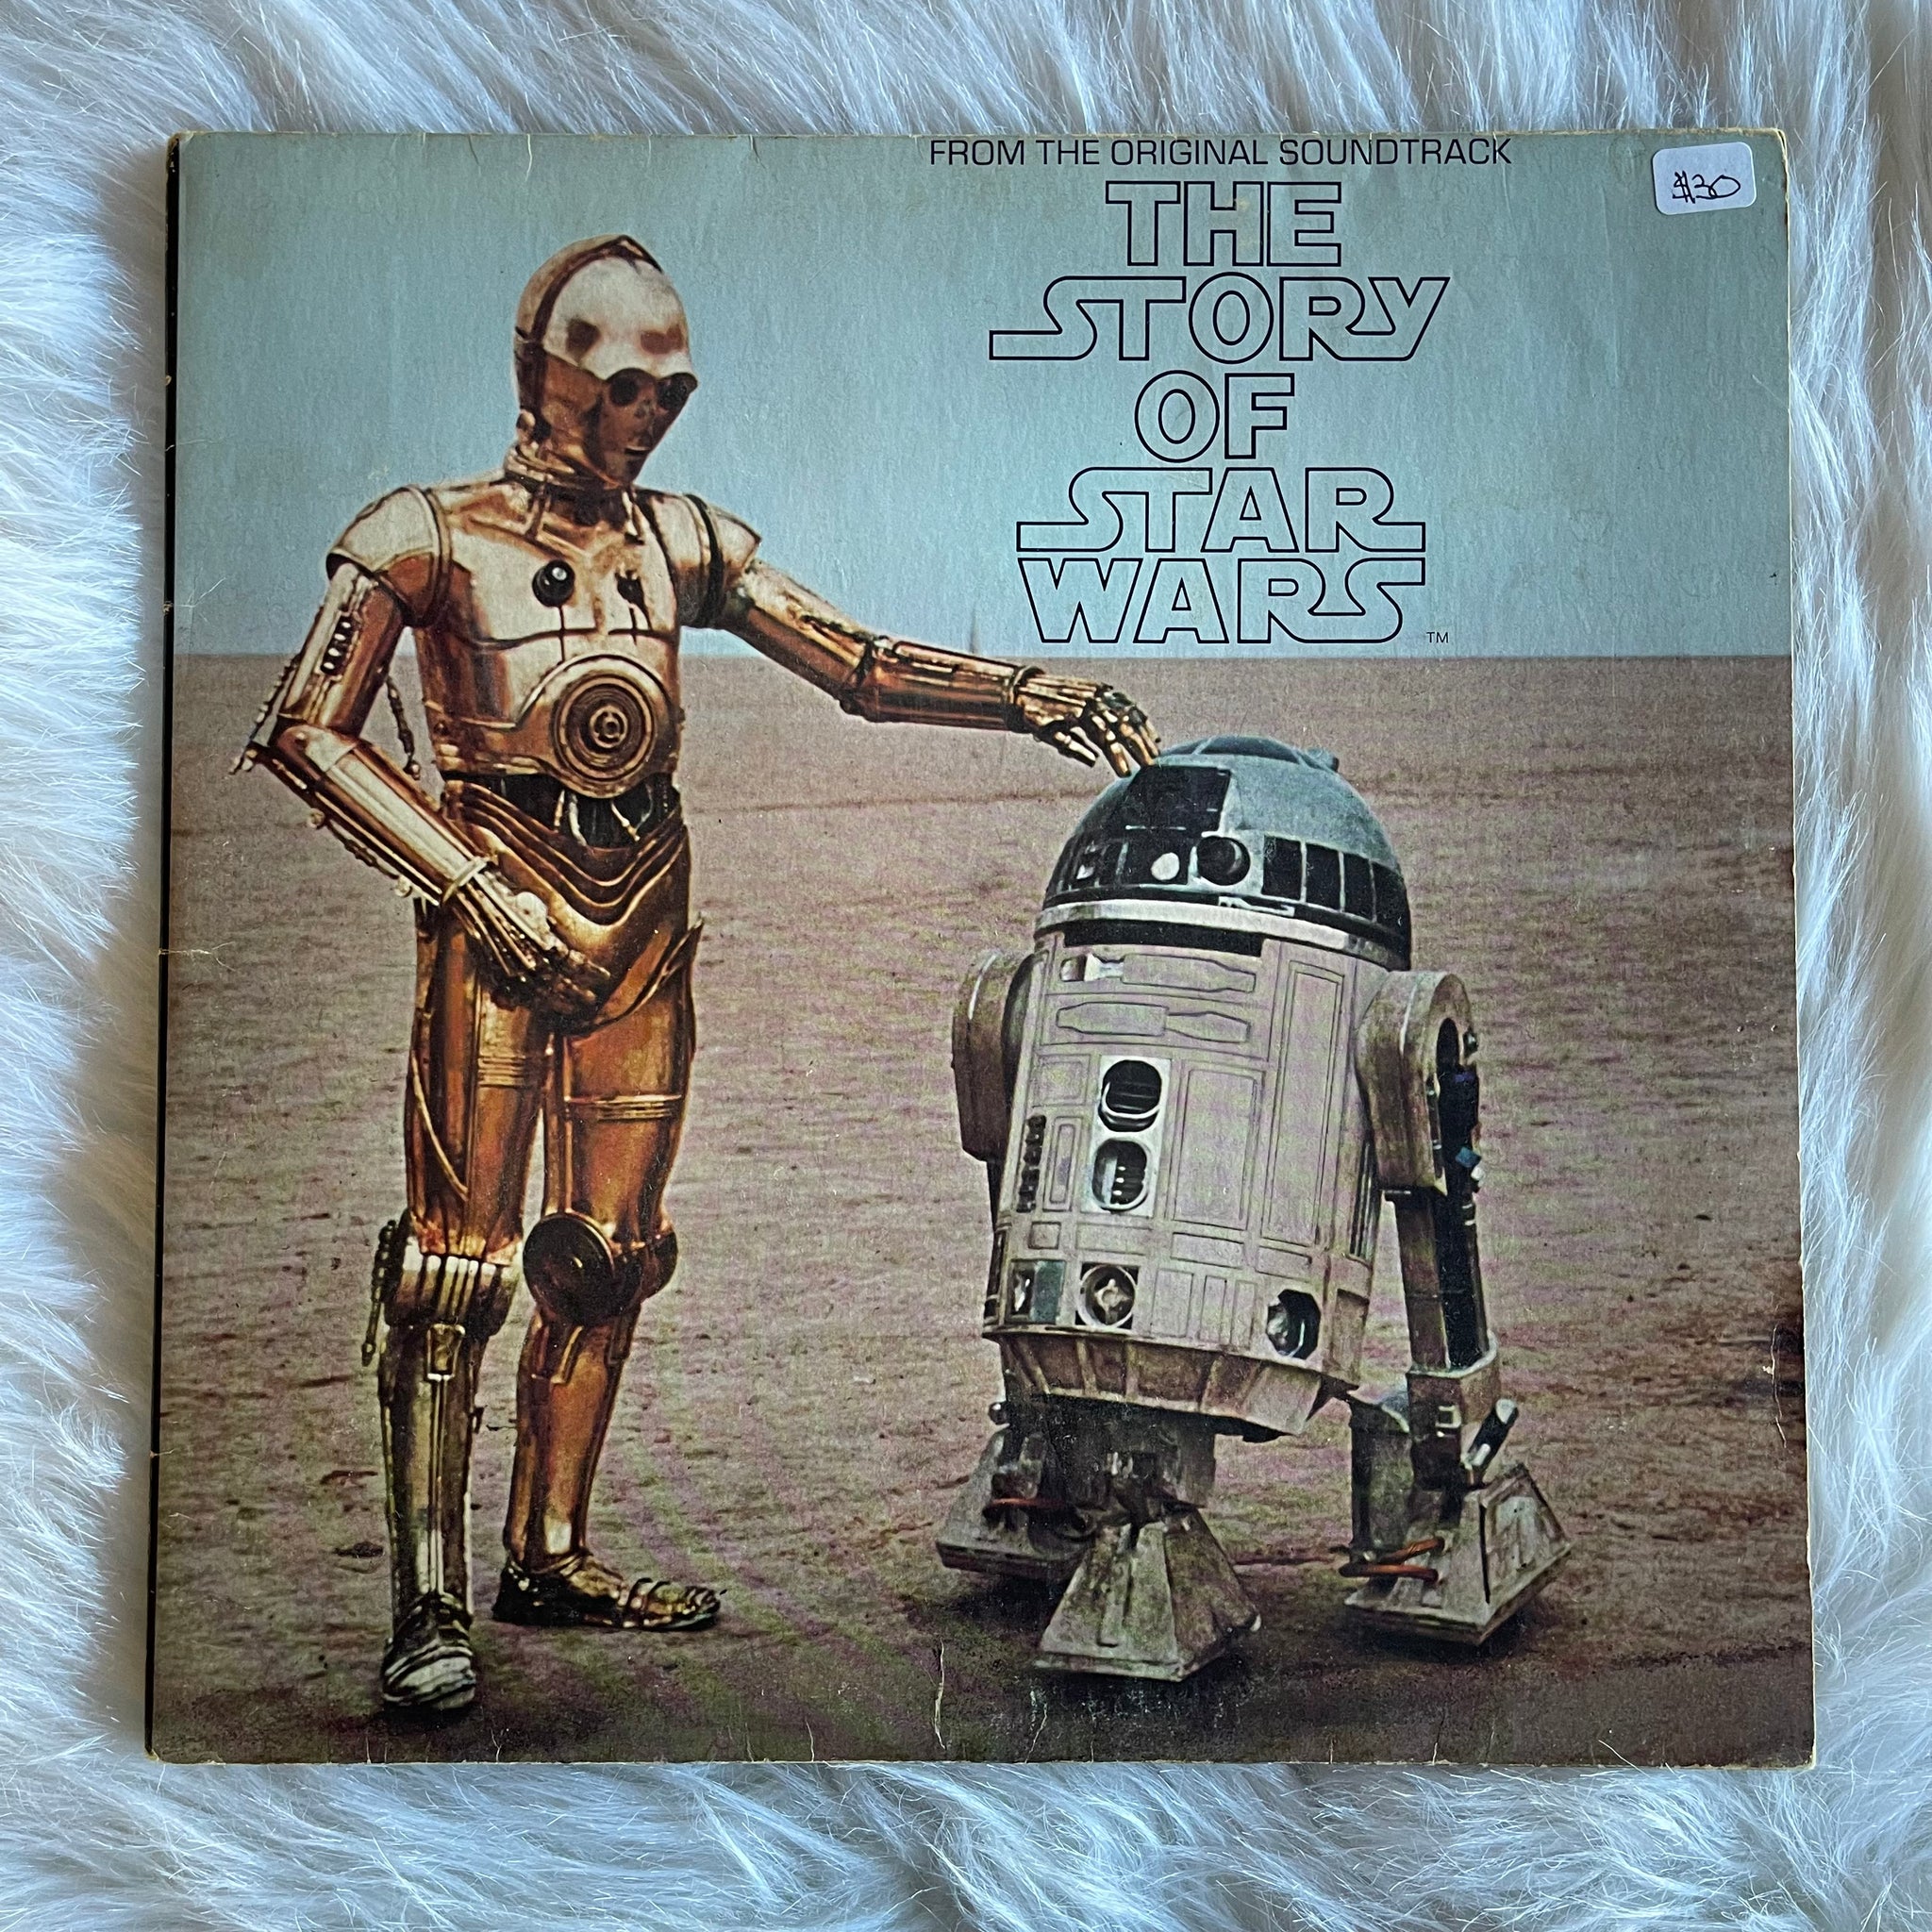 The Story of Star Wars-The Original Soundtrack 1977